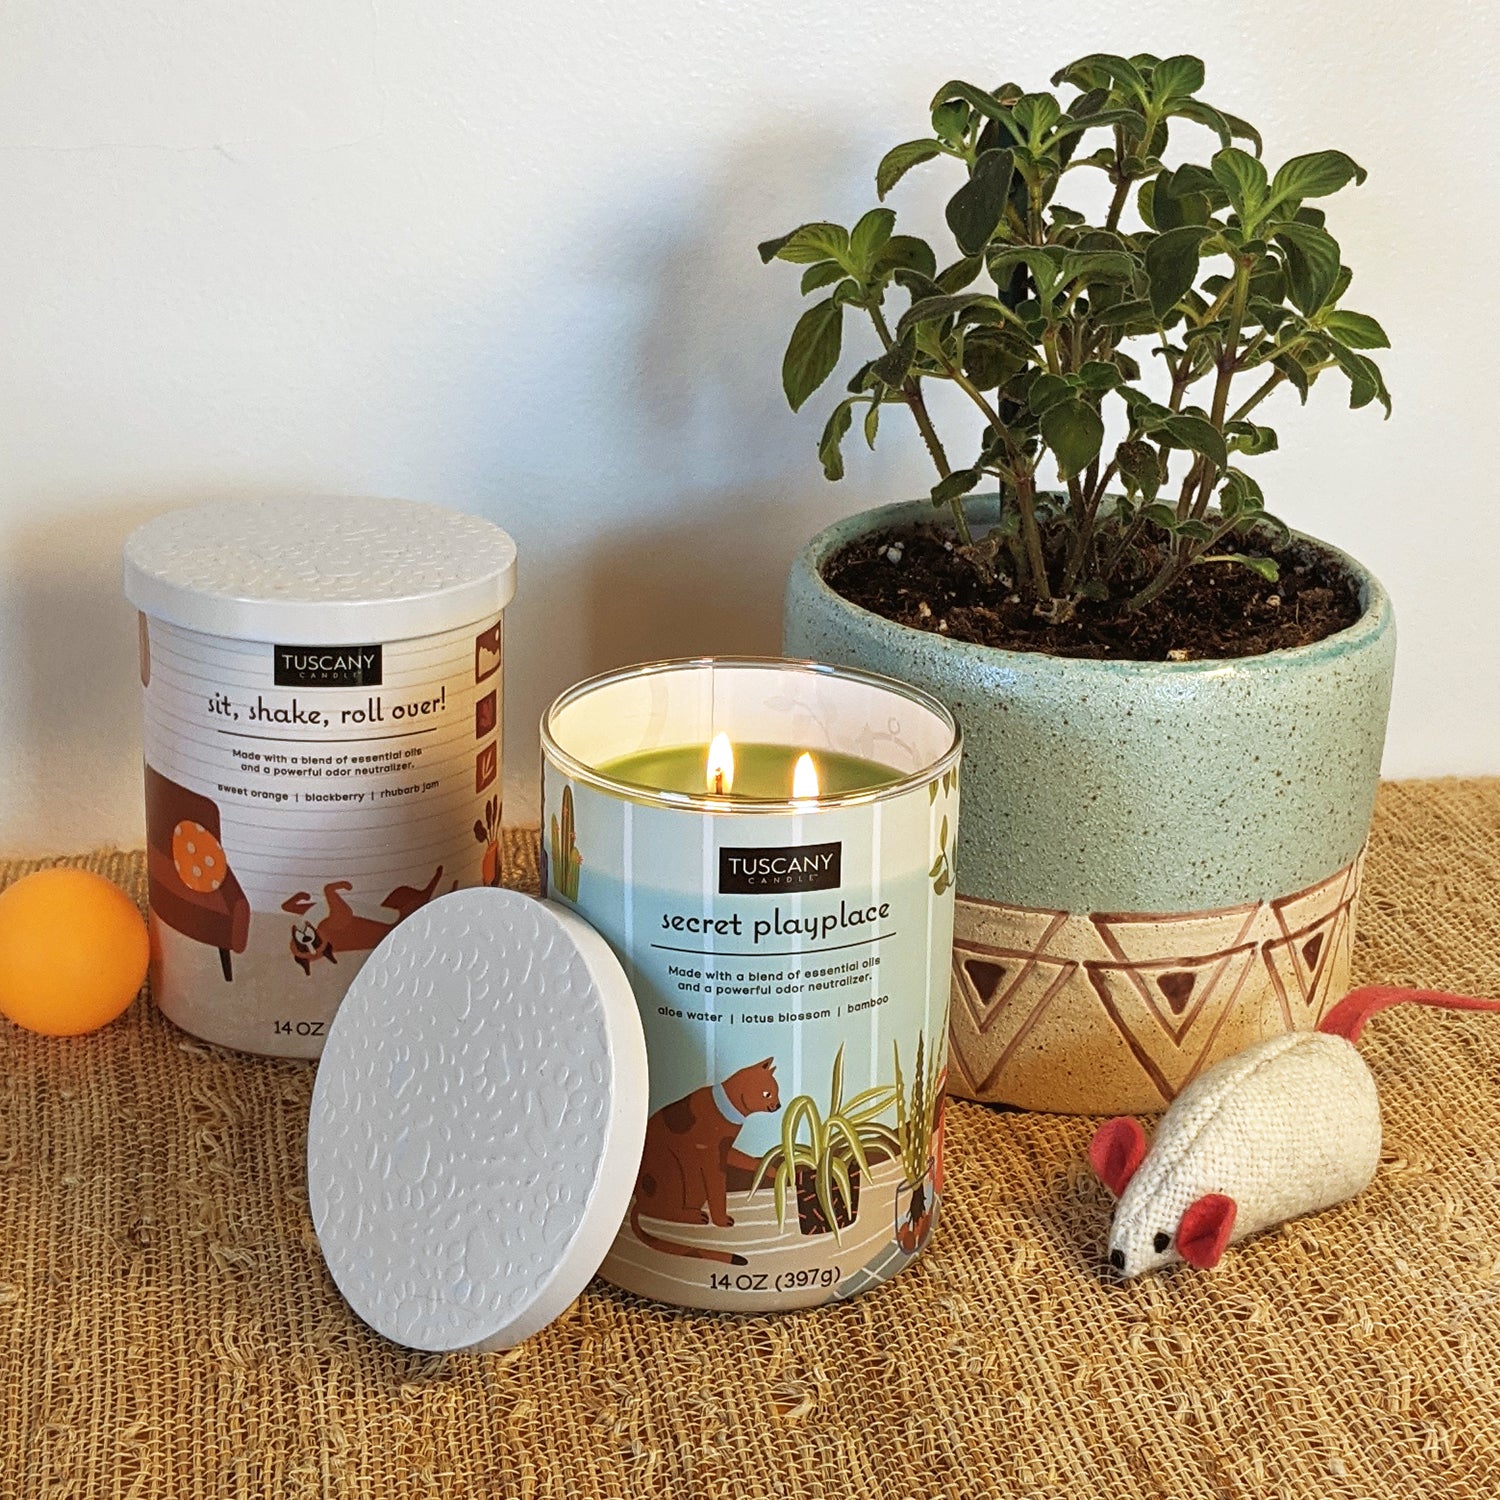 A group of Tuscany Candles Secret Playplace Scented Jar Candle (14 oz) – Pet Odor Control Collection and a plant that provide fragrance and odor control.